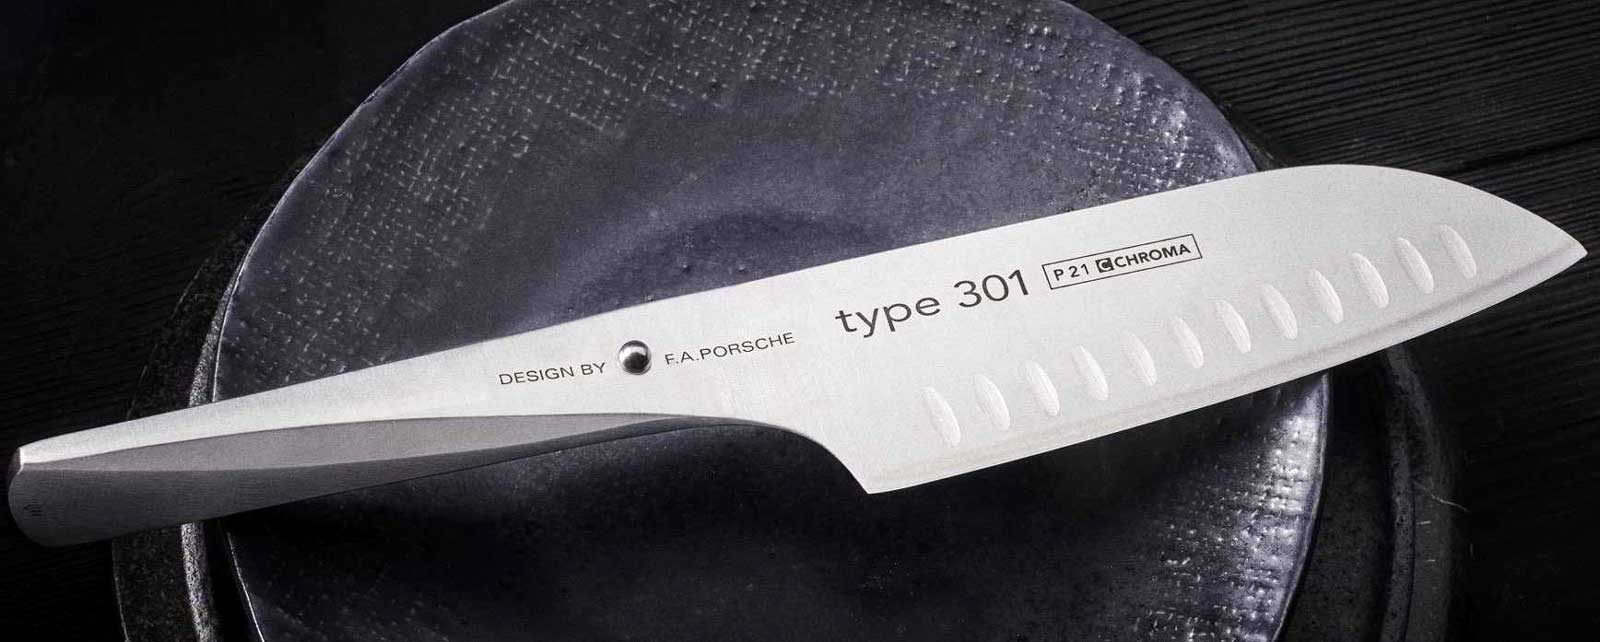 CHROMA type 301 - Design by FA Porsche - chef`s knife These innovative knives Type 301, designed by the design company FA Porsche, open a new chapter in the development of kitchen knives.